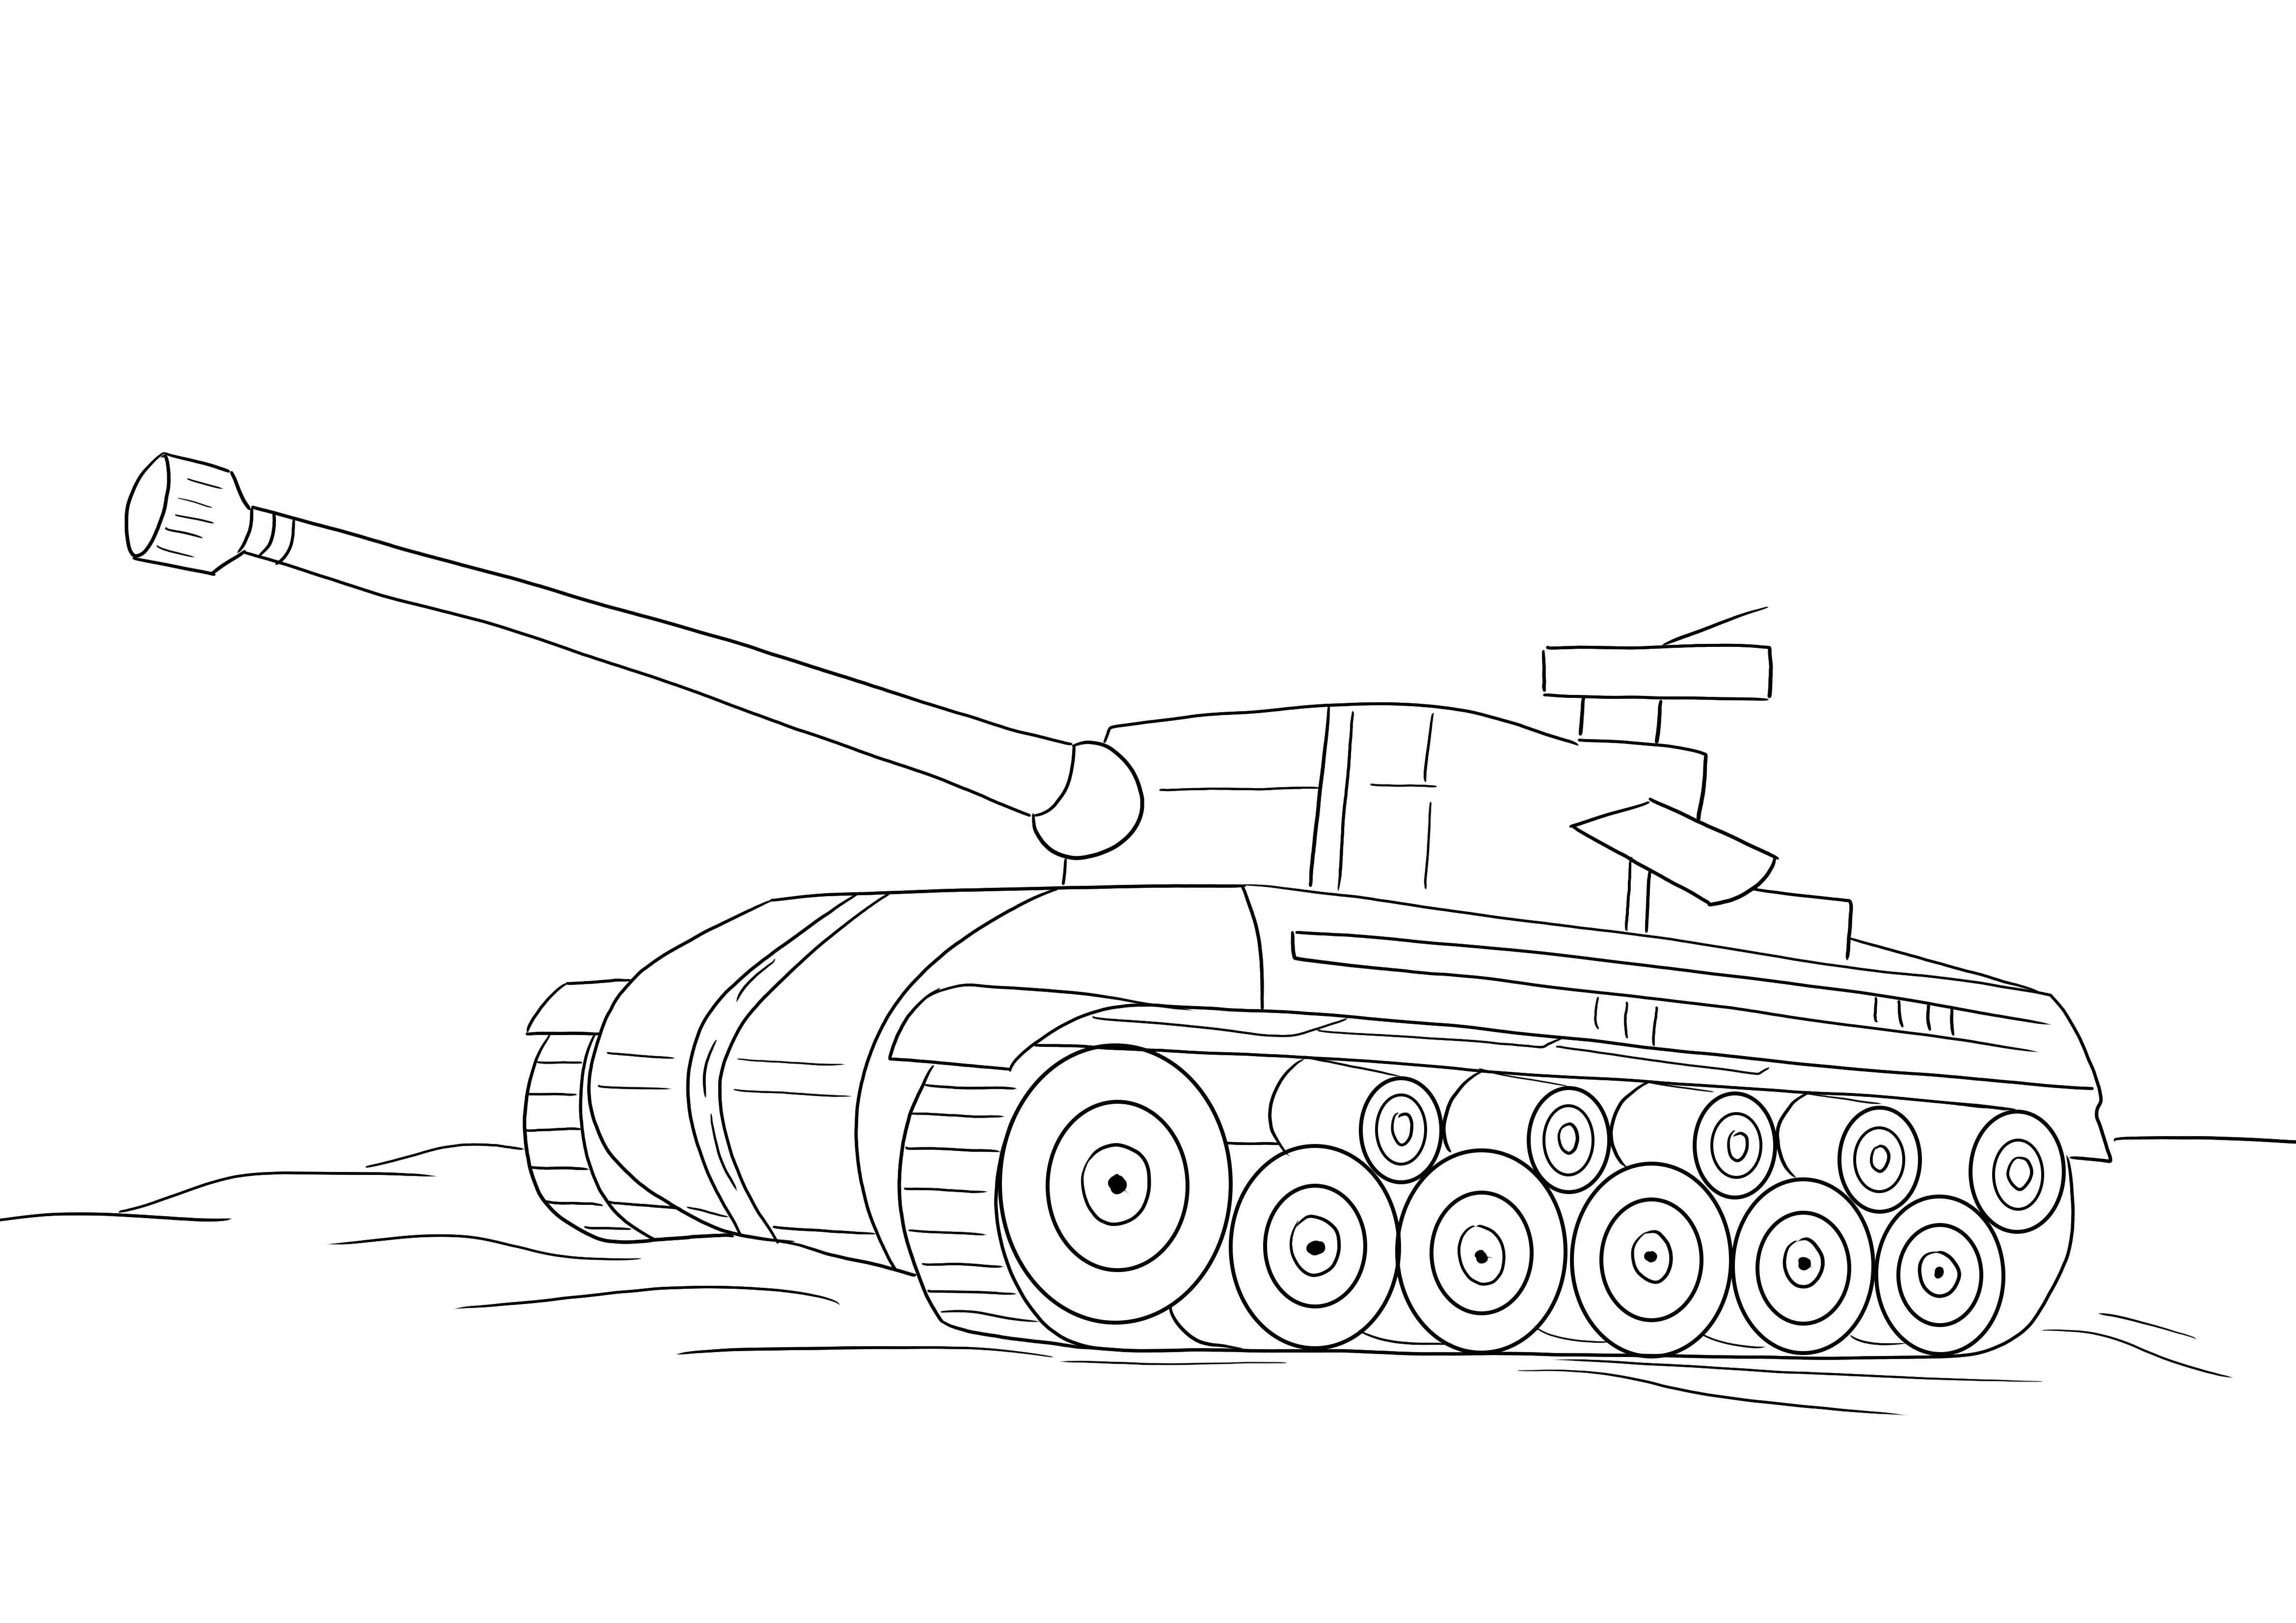 Tank coloring page for free for kids to learn about types of transportation